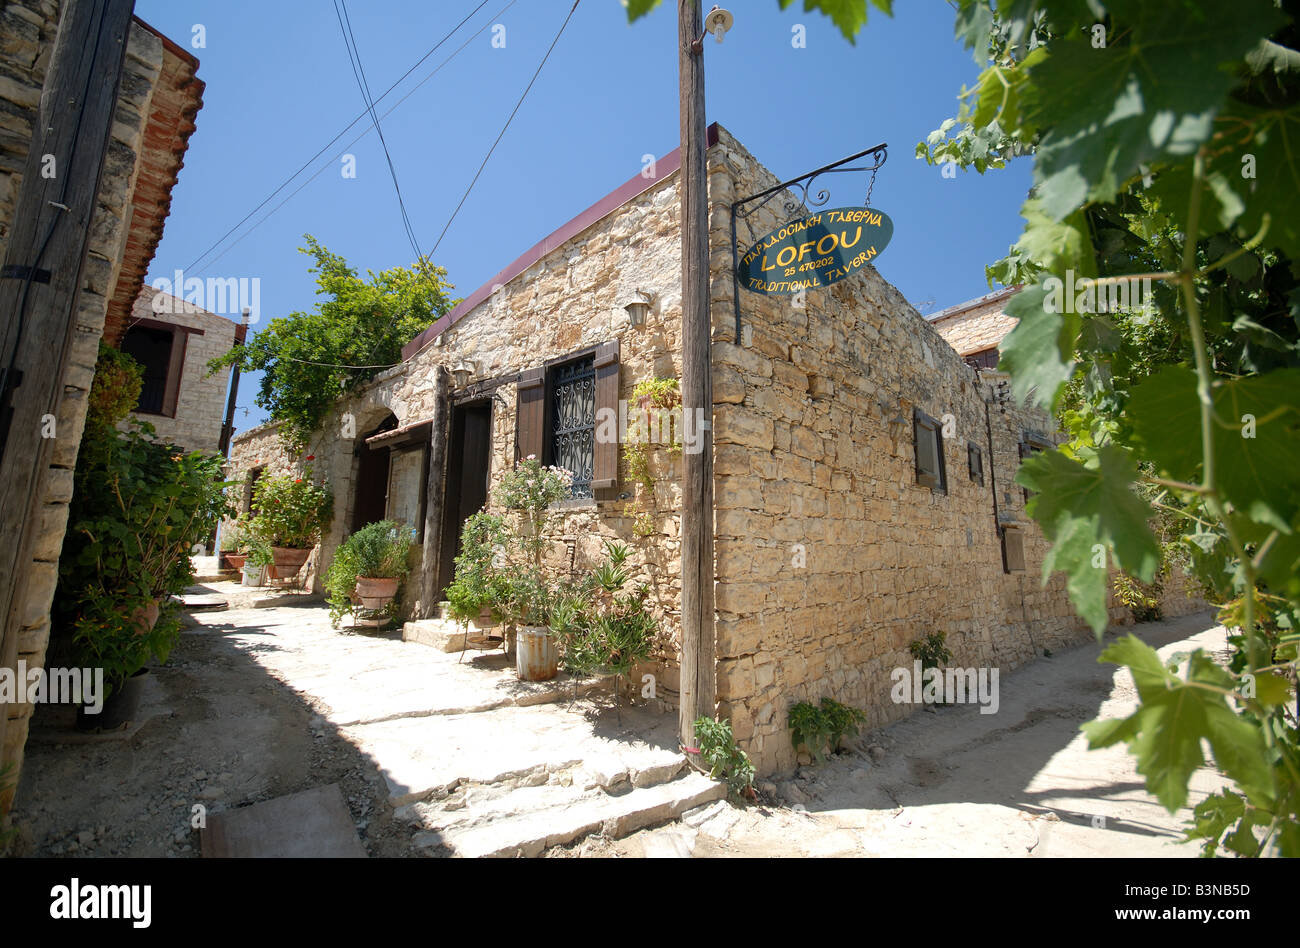 CYPRUS. A restaurant in the village of Lofou in the lower Troodhos mountains near Limassol. Stock Photo